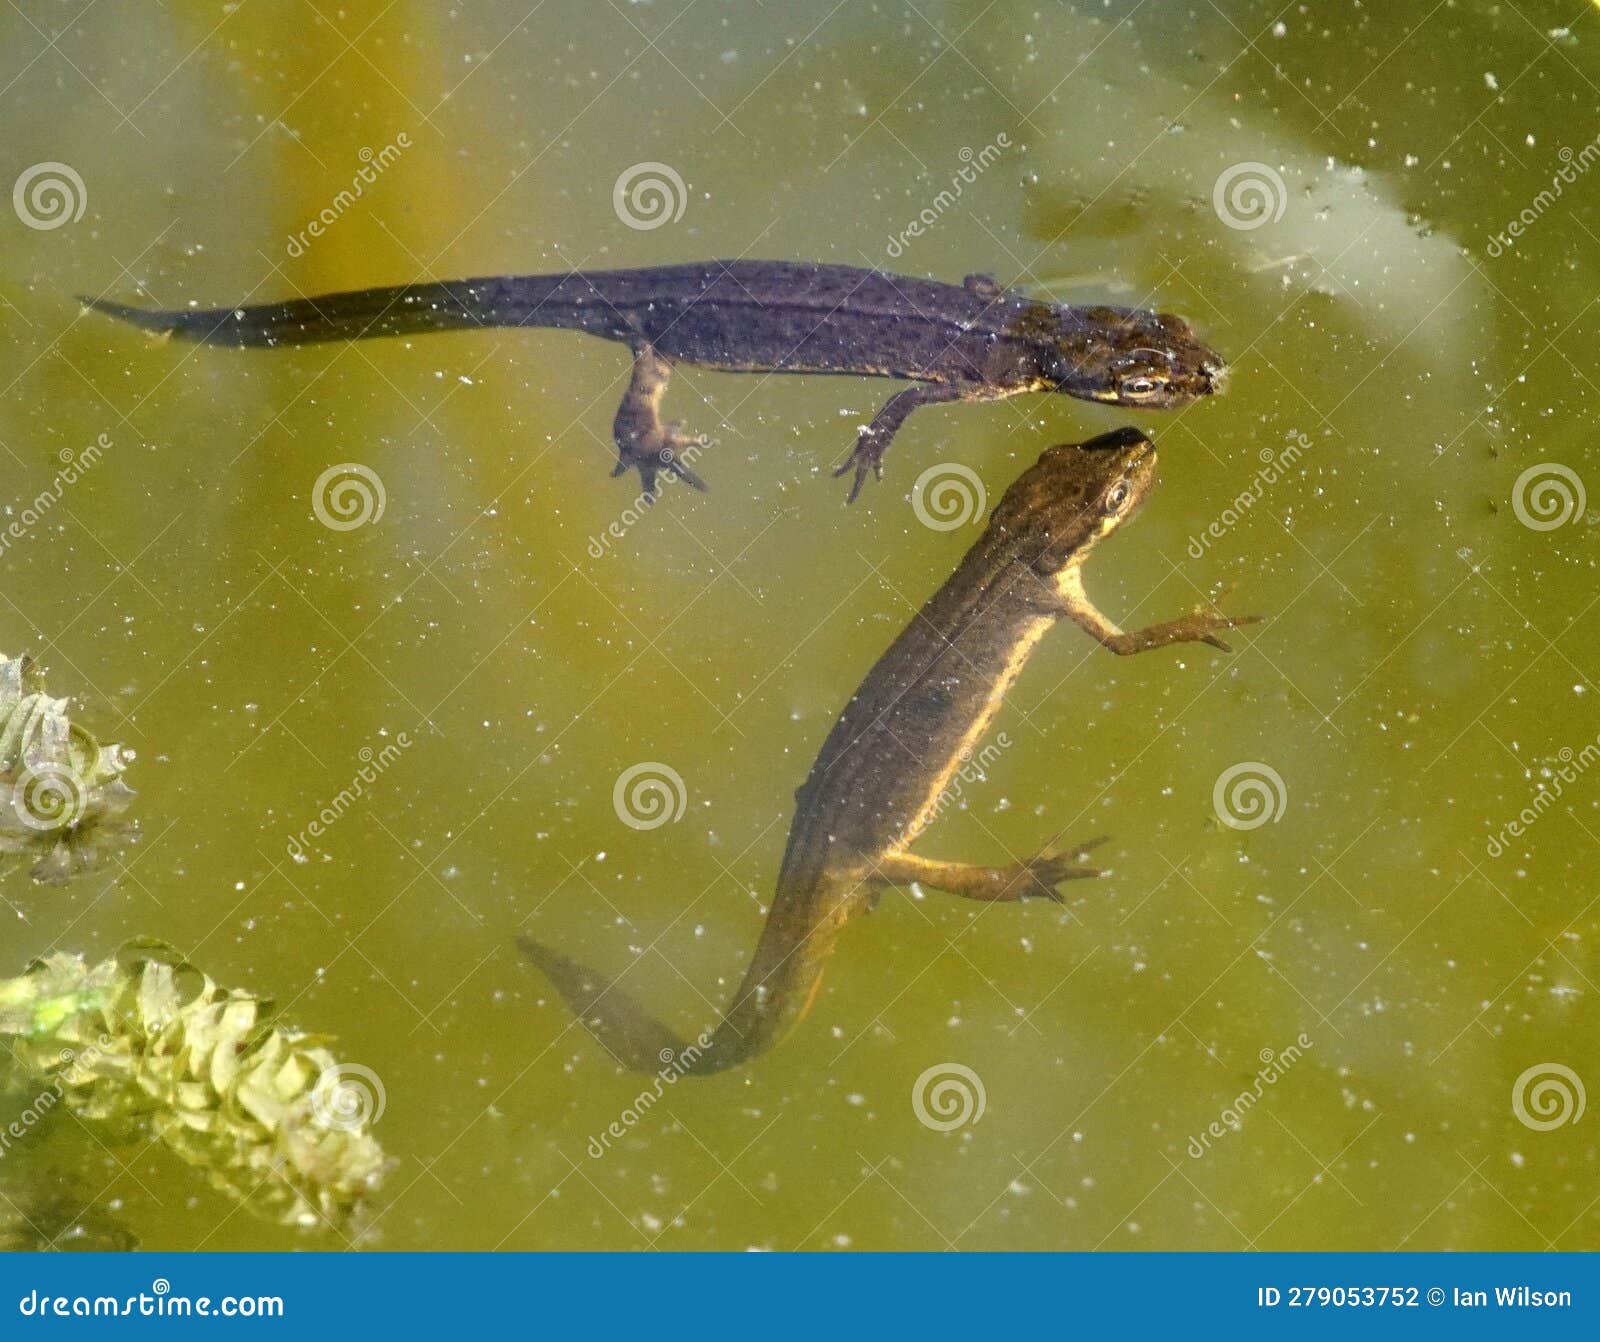 common newts in a garden pond